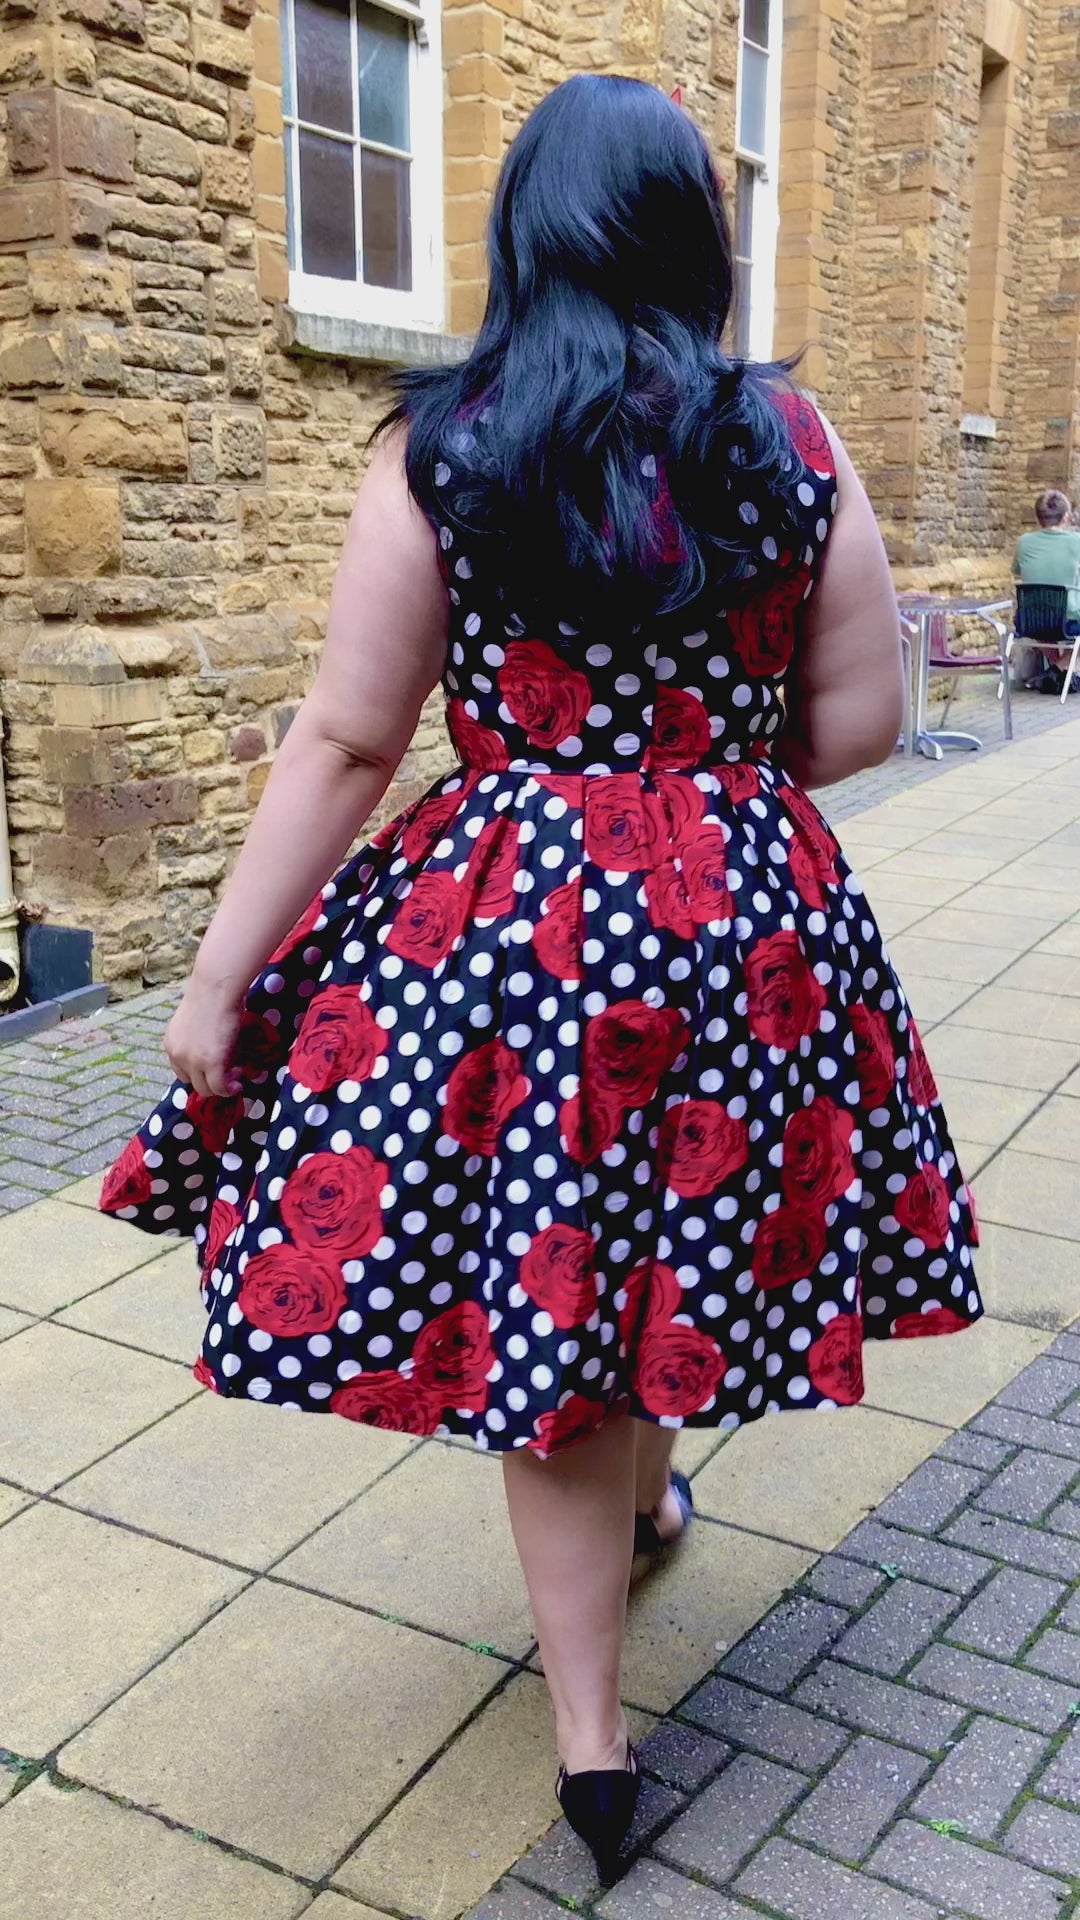 video of woman wearing our Elizabeth black party dress, with red roses and white spots